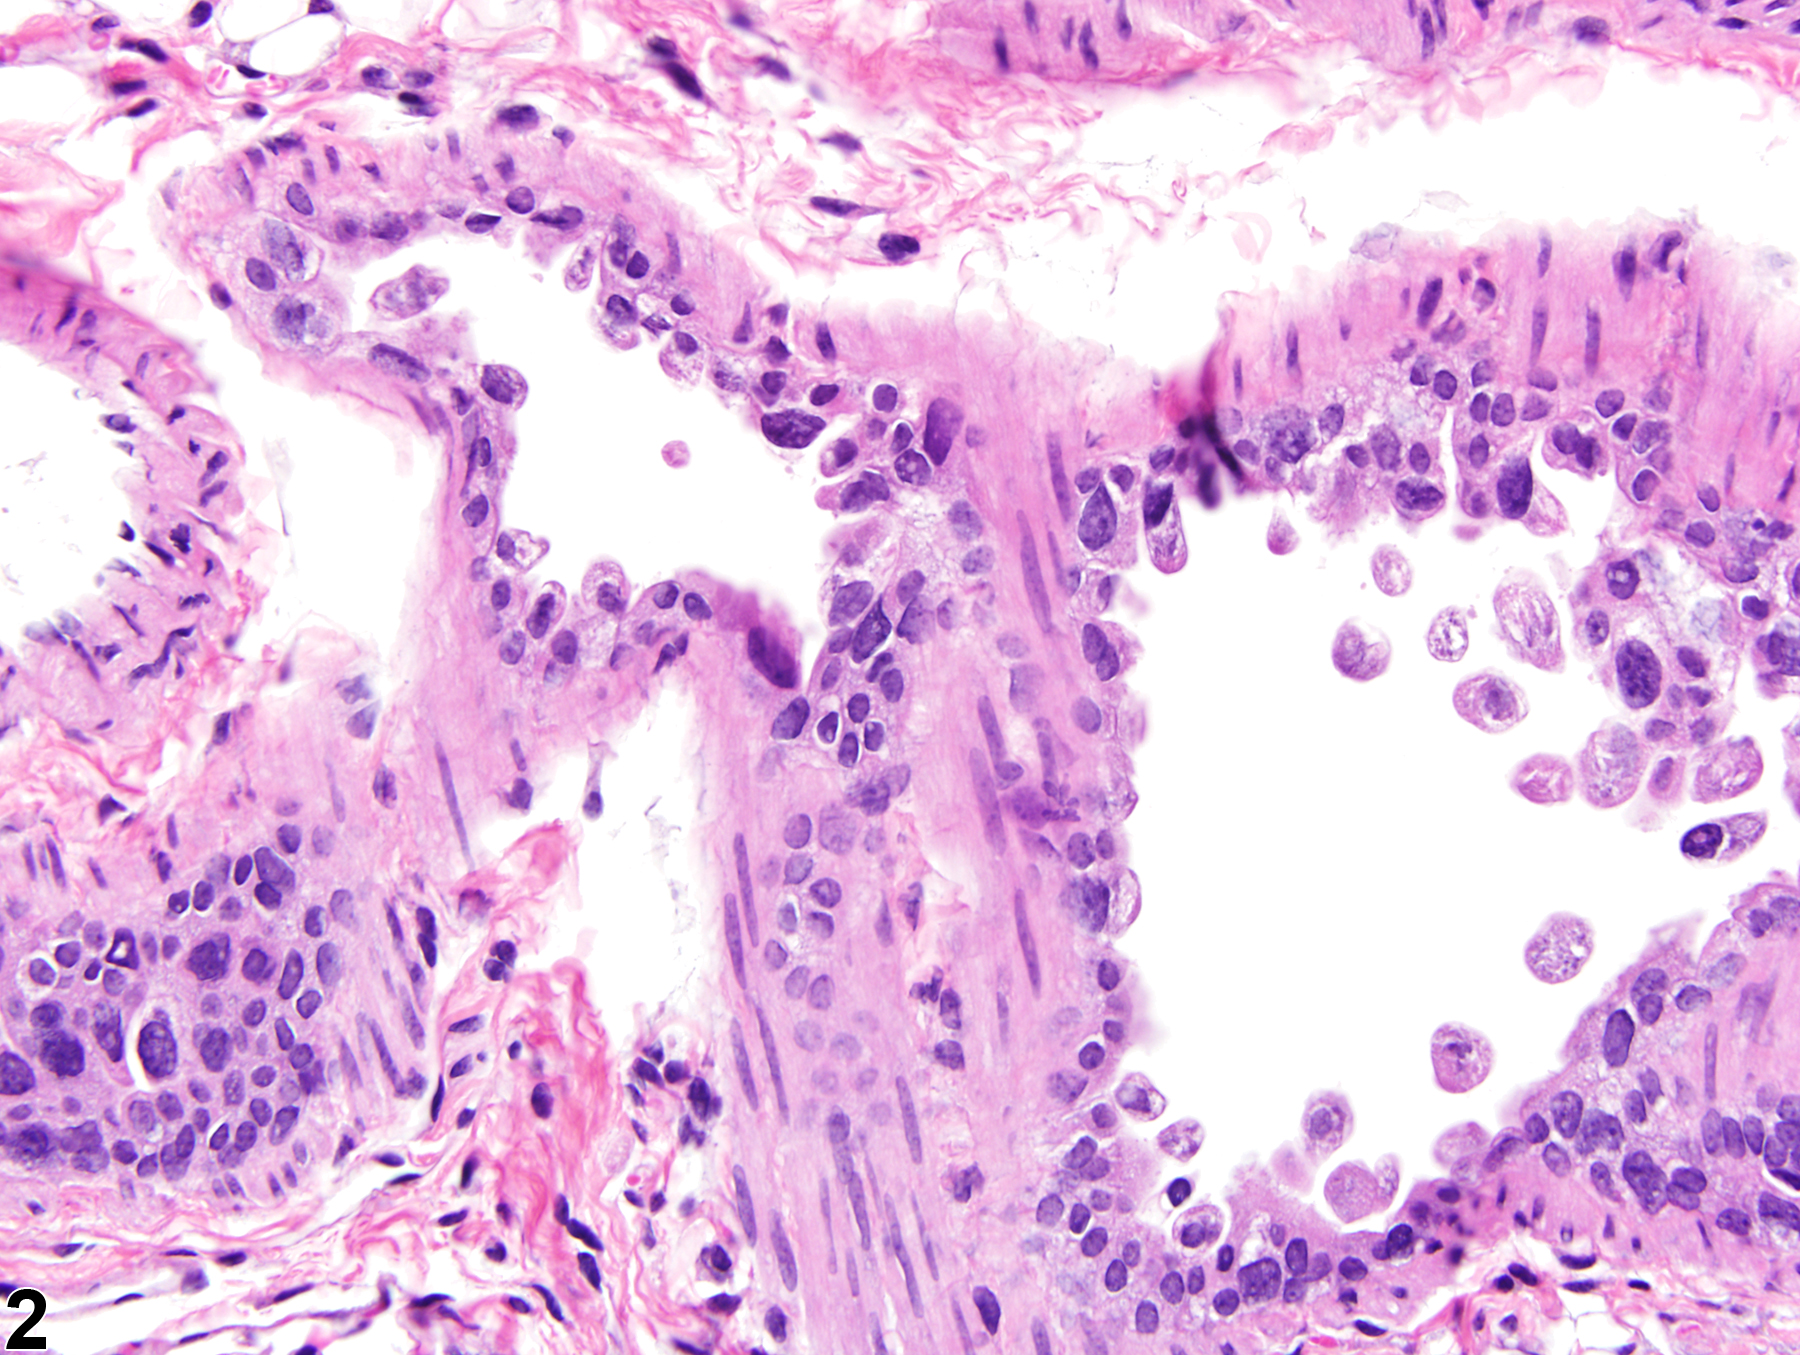 Image of epithelial degeneration in the lung from a male B6C3F1/N mouse in a subchronic study